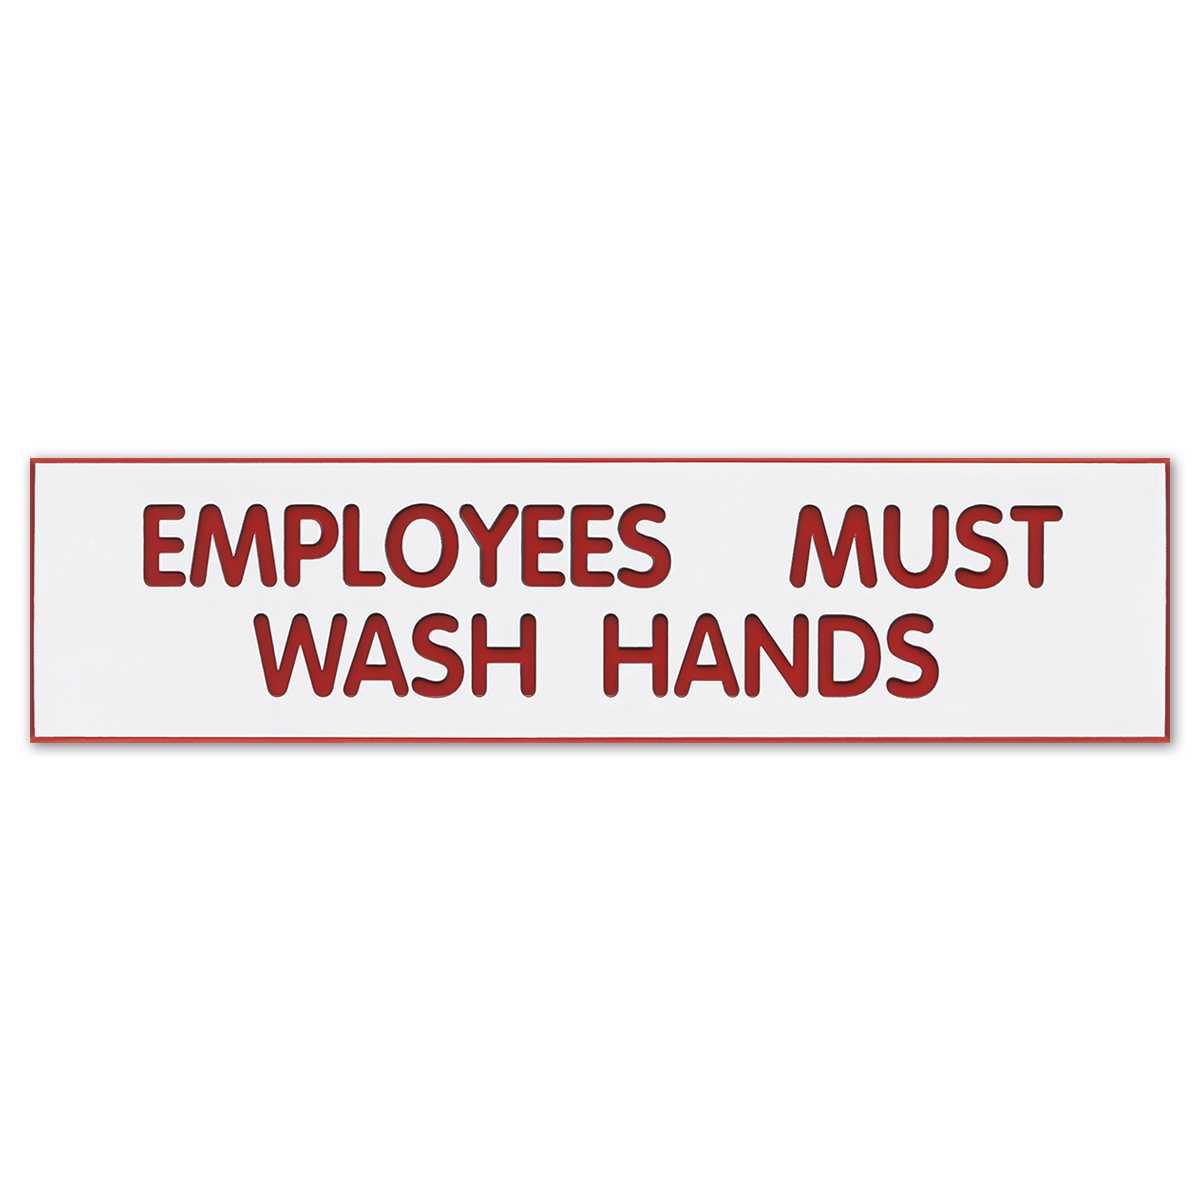 EMPLOYEES MUST WASH HANDS - Plastic Sign - 098002